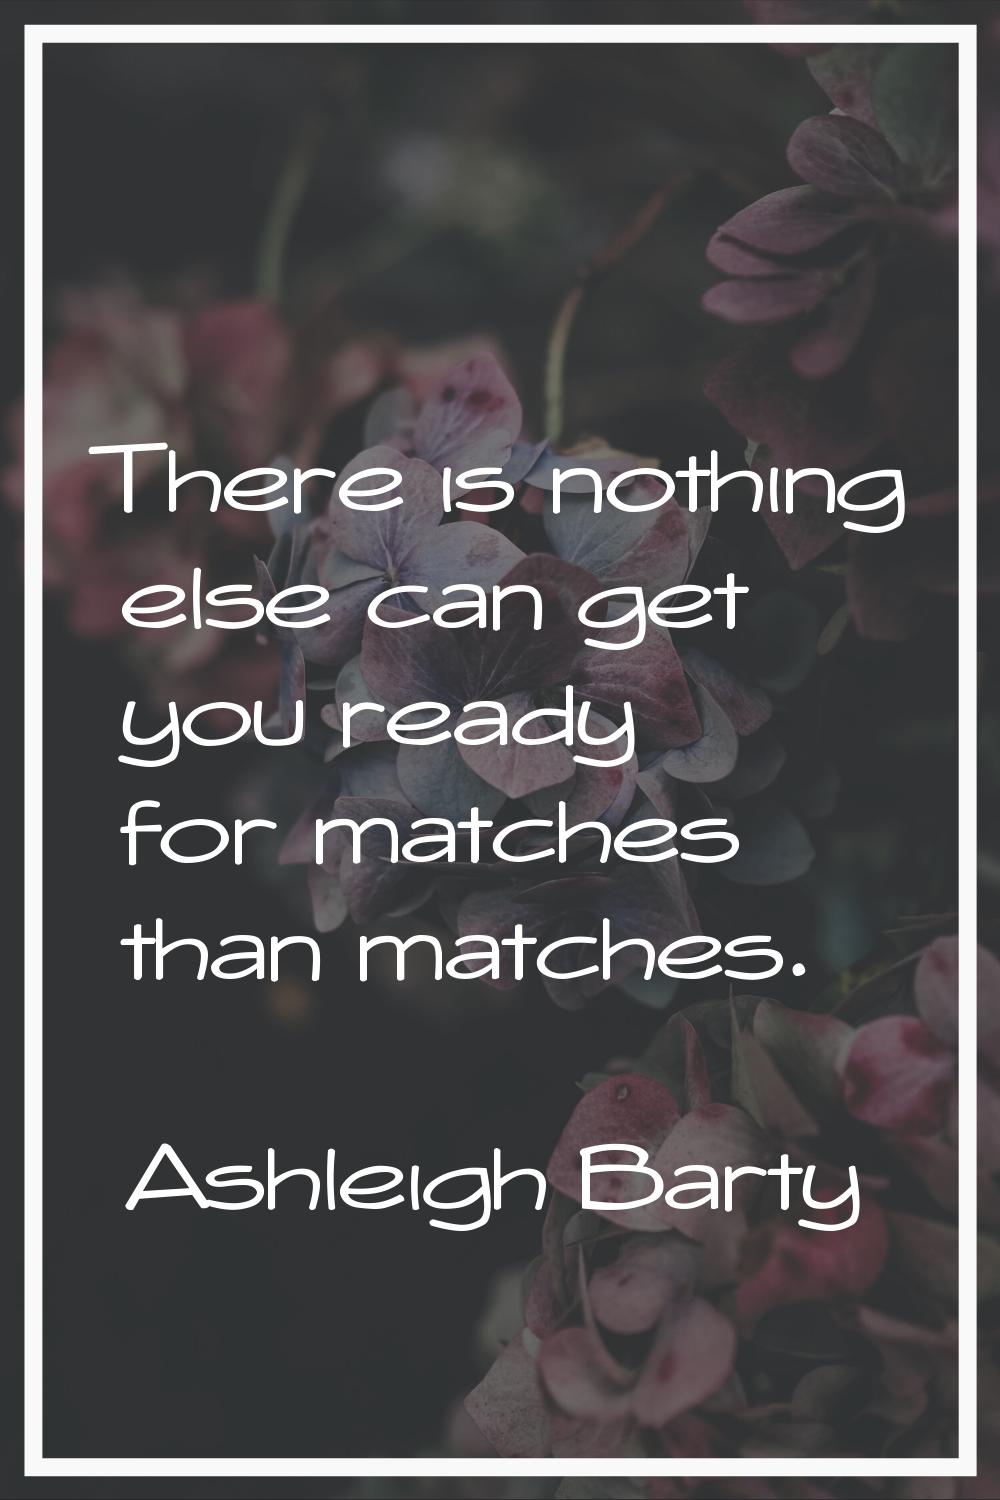 There is nothing else can get you ready for matches than matches.